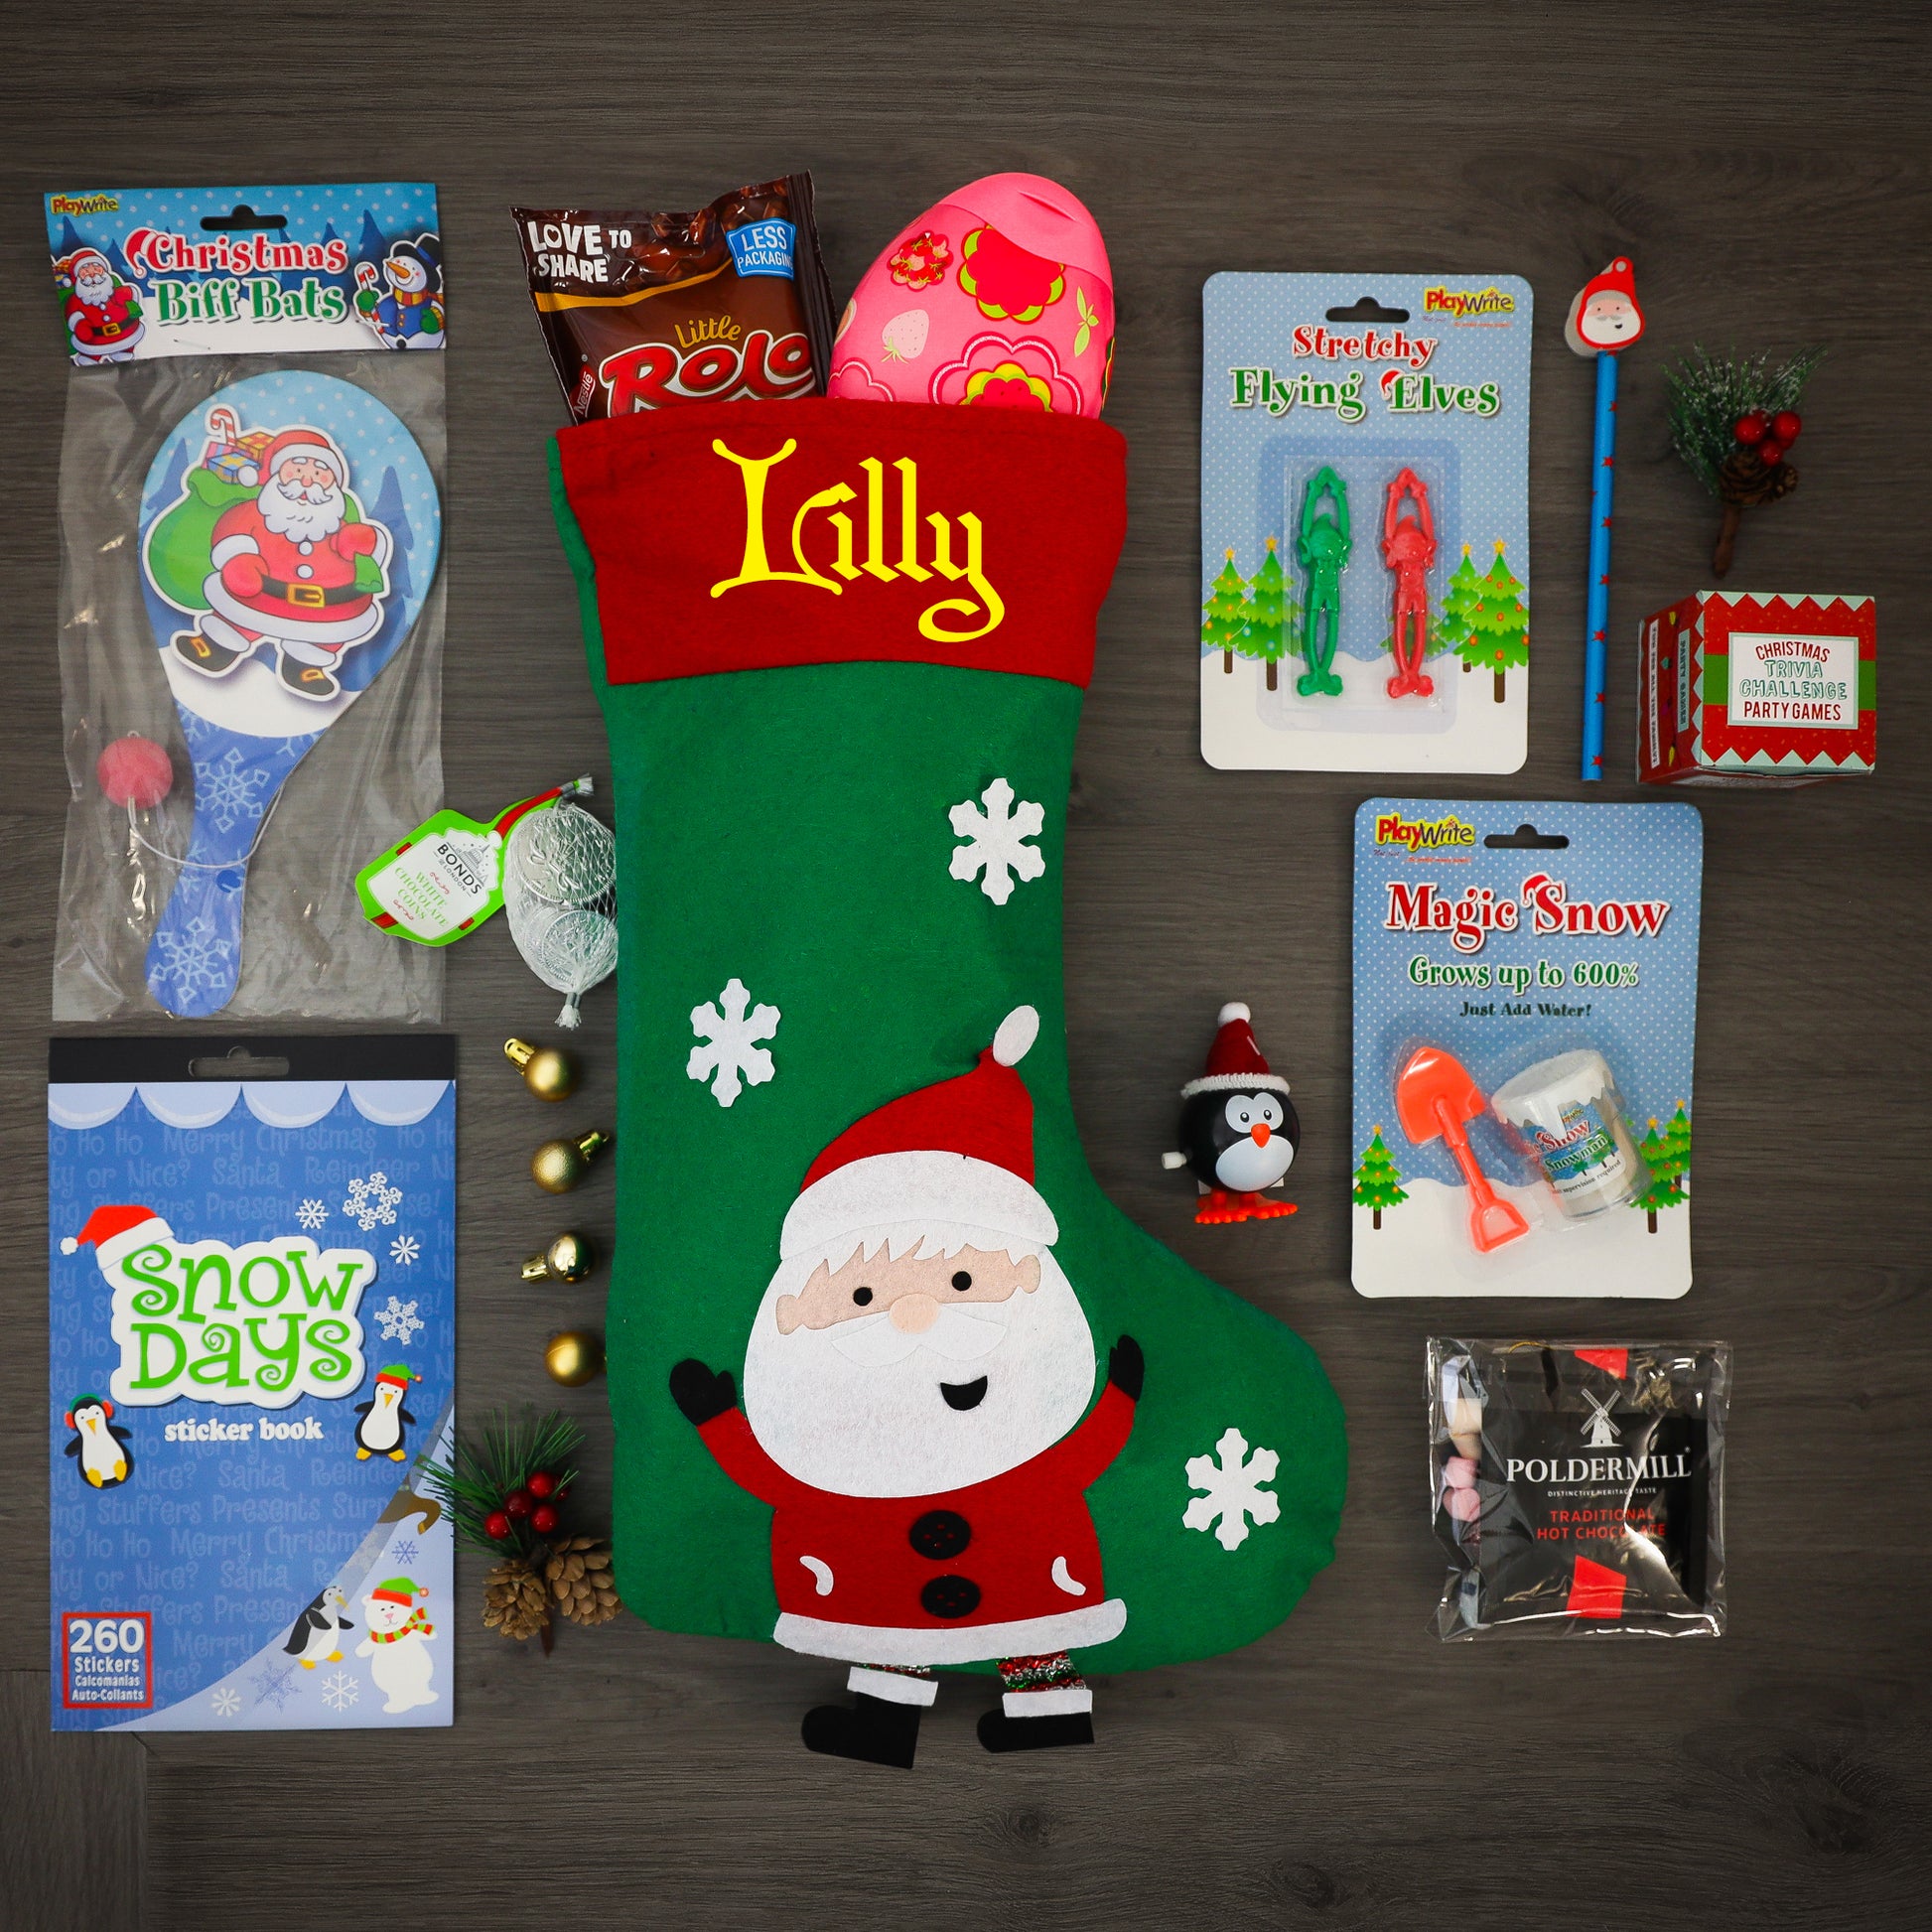 Vinyl Christmas  Stocking Personalised with name & Filled Ready to gift  - Always Looking Good - Santa Stocking  